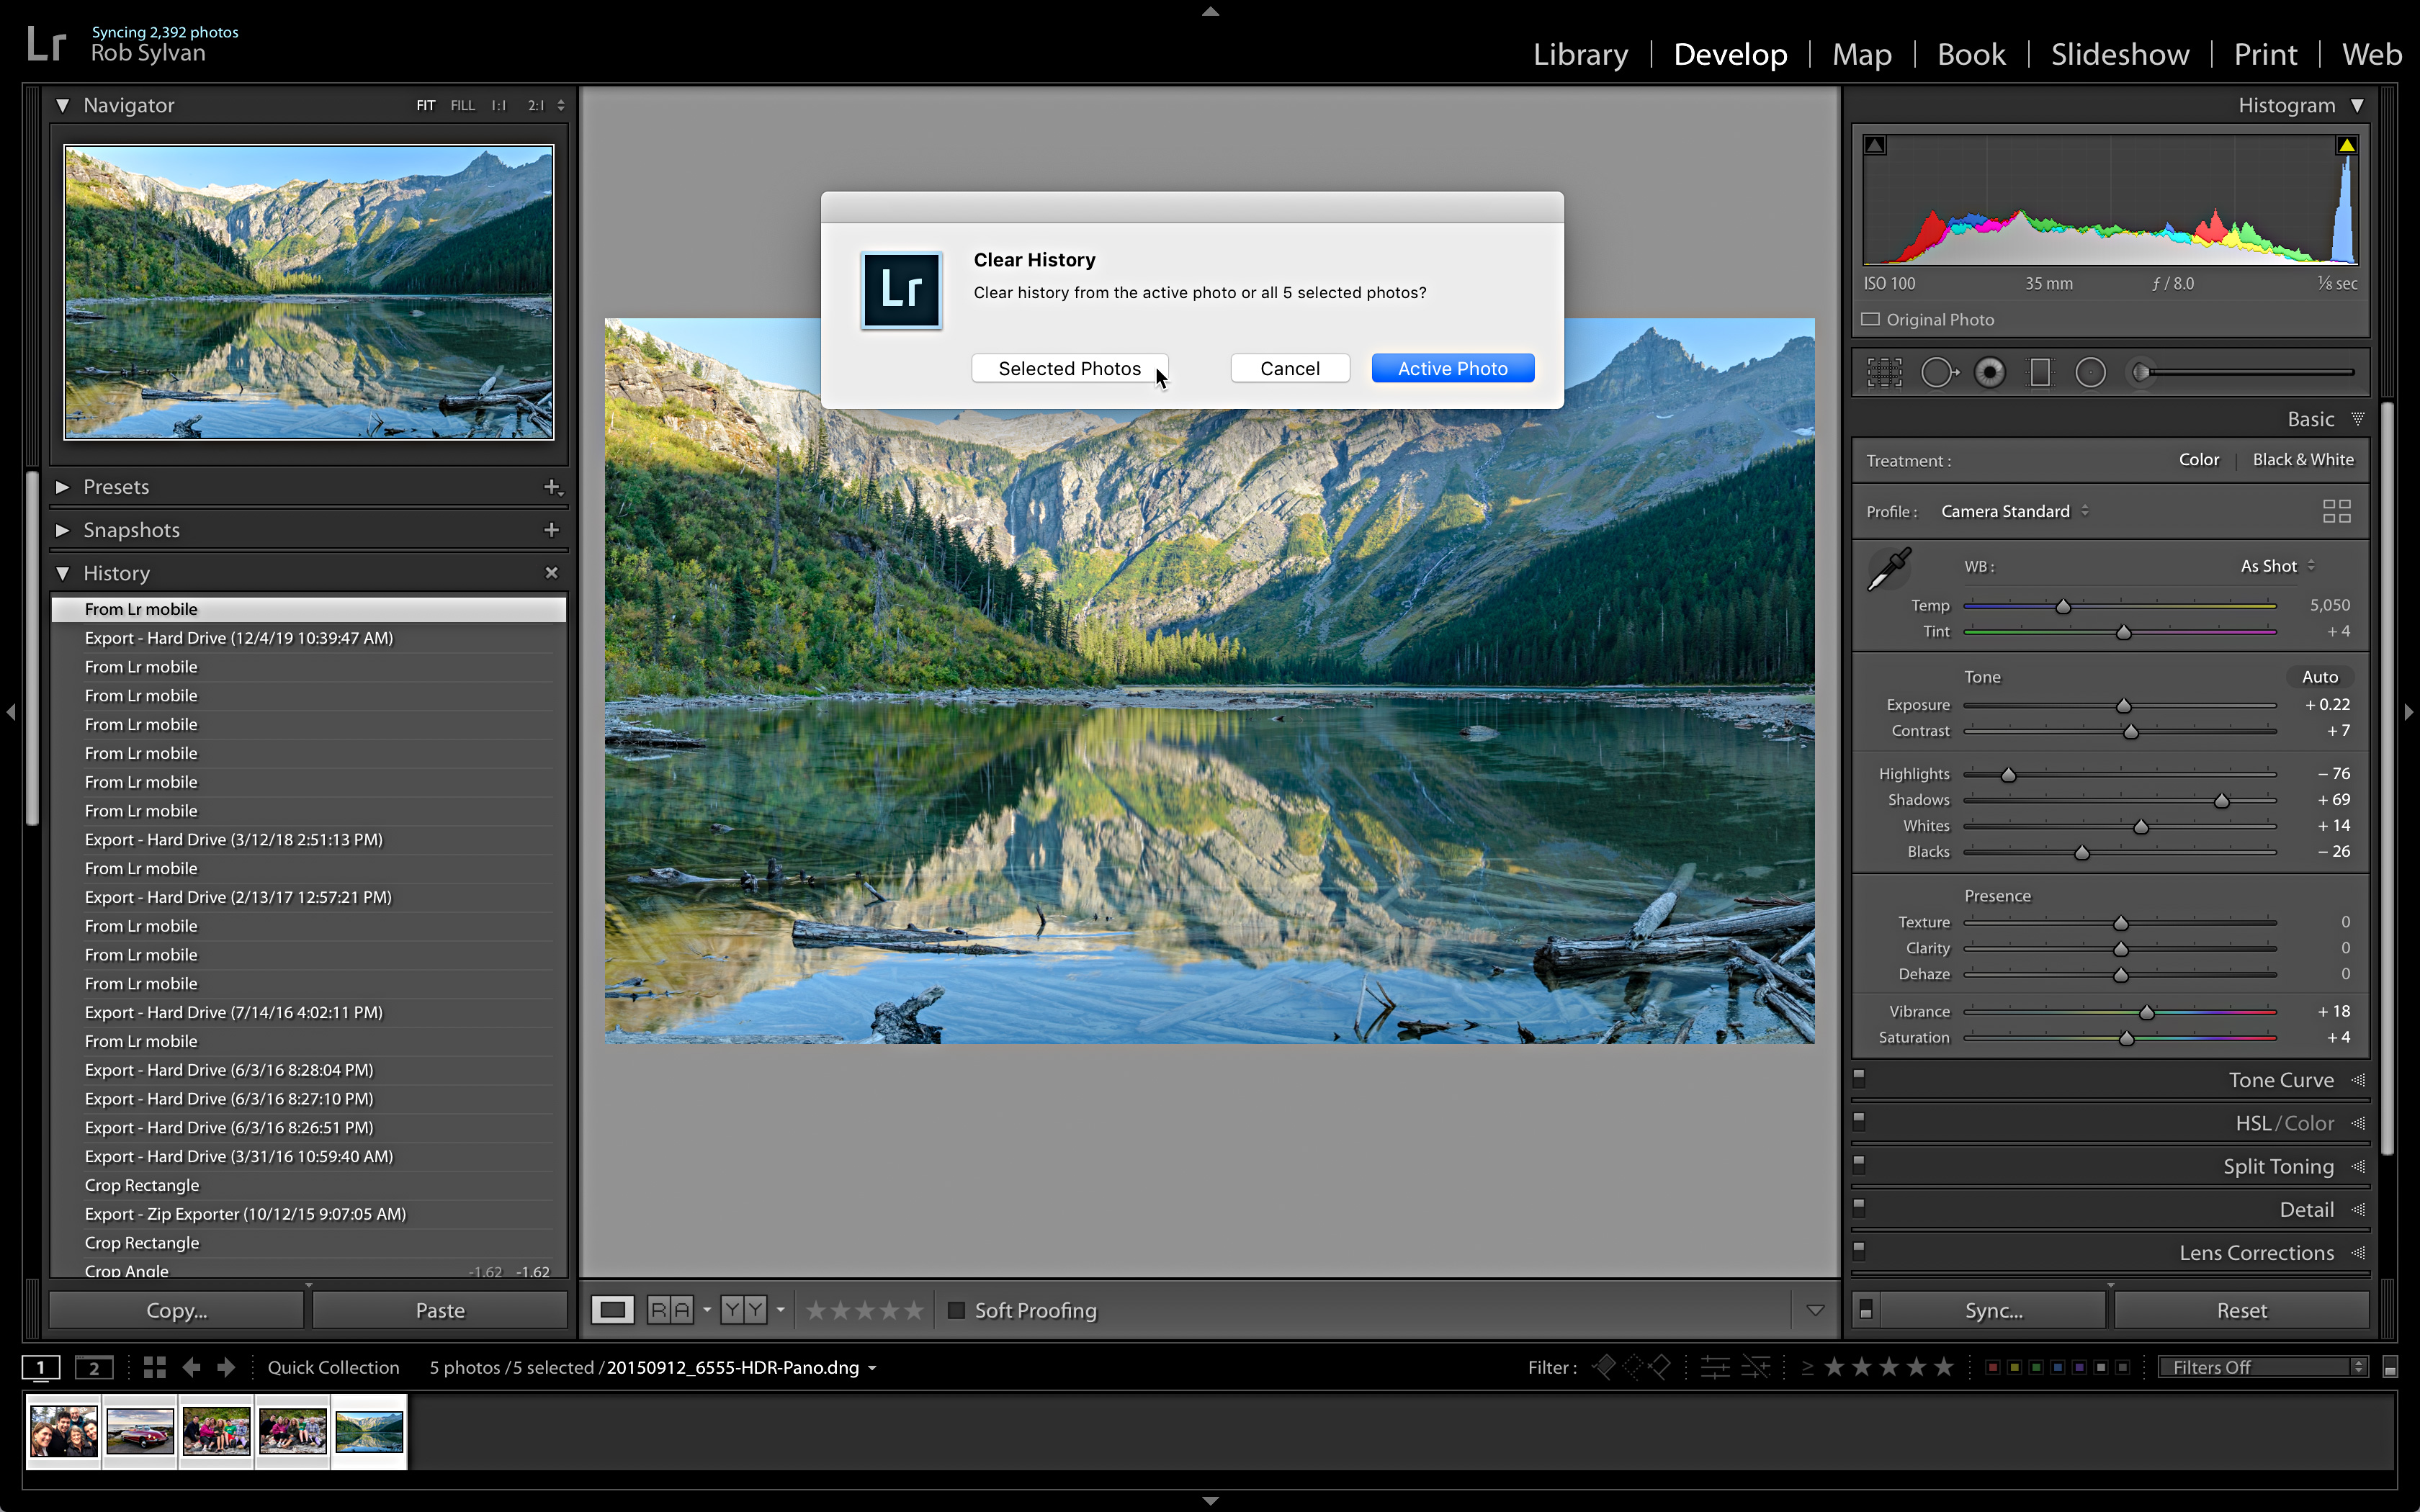 download Adobe Photoshop Lightroom Classic CC Classroom in a Book pdf free torrent